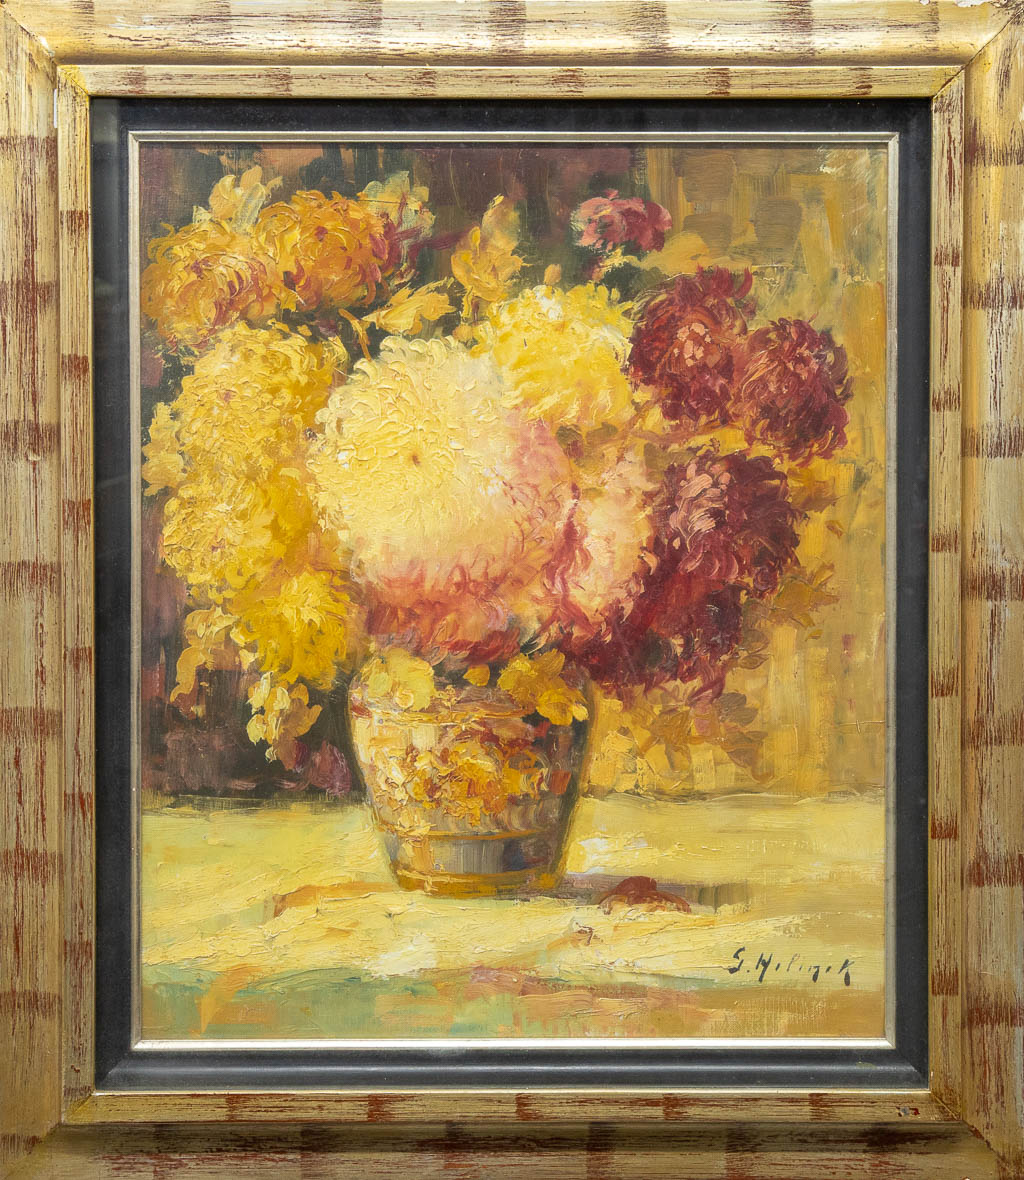 Gustave HELINCK (1884-1954) 'Bloementuil' a flower painting, oil on canvas. (50 x 60 cm)